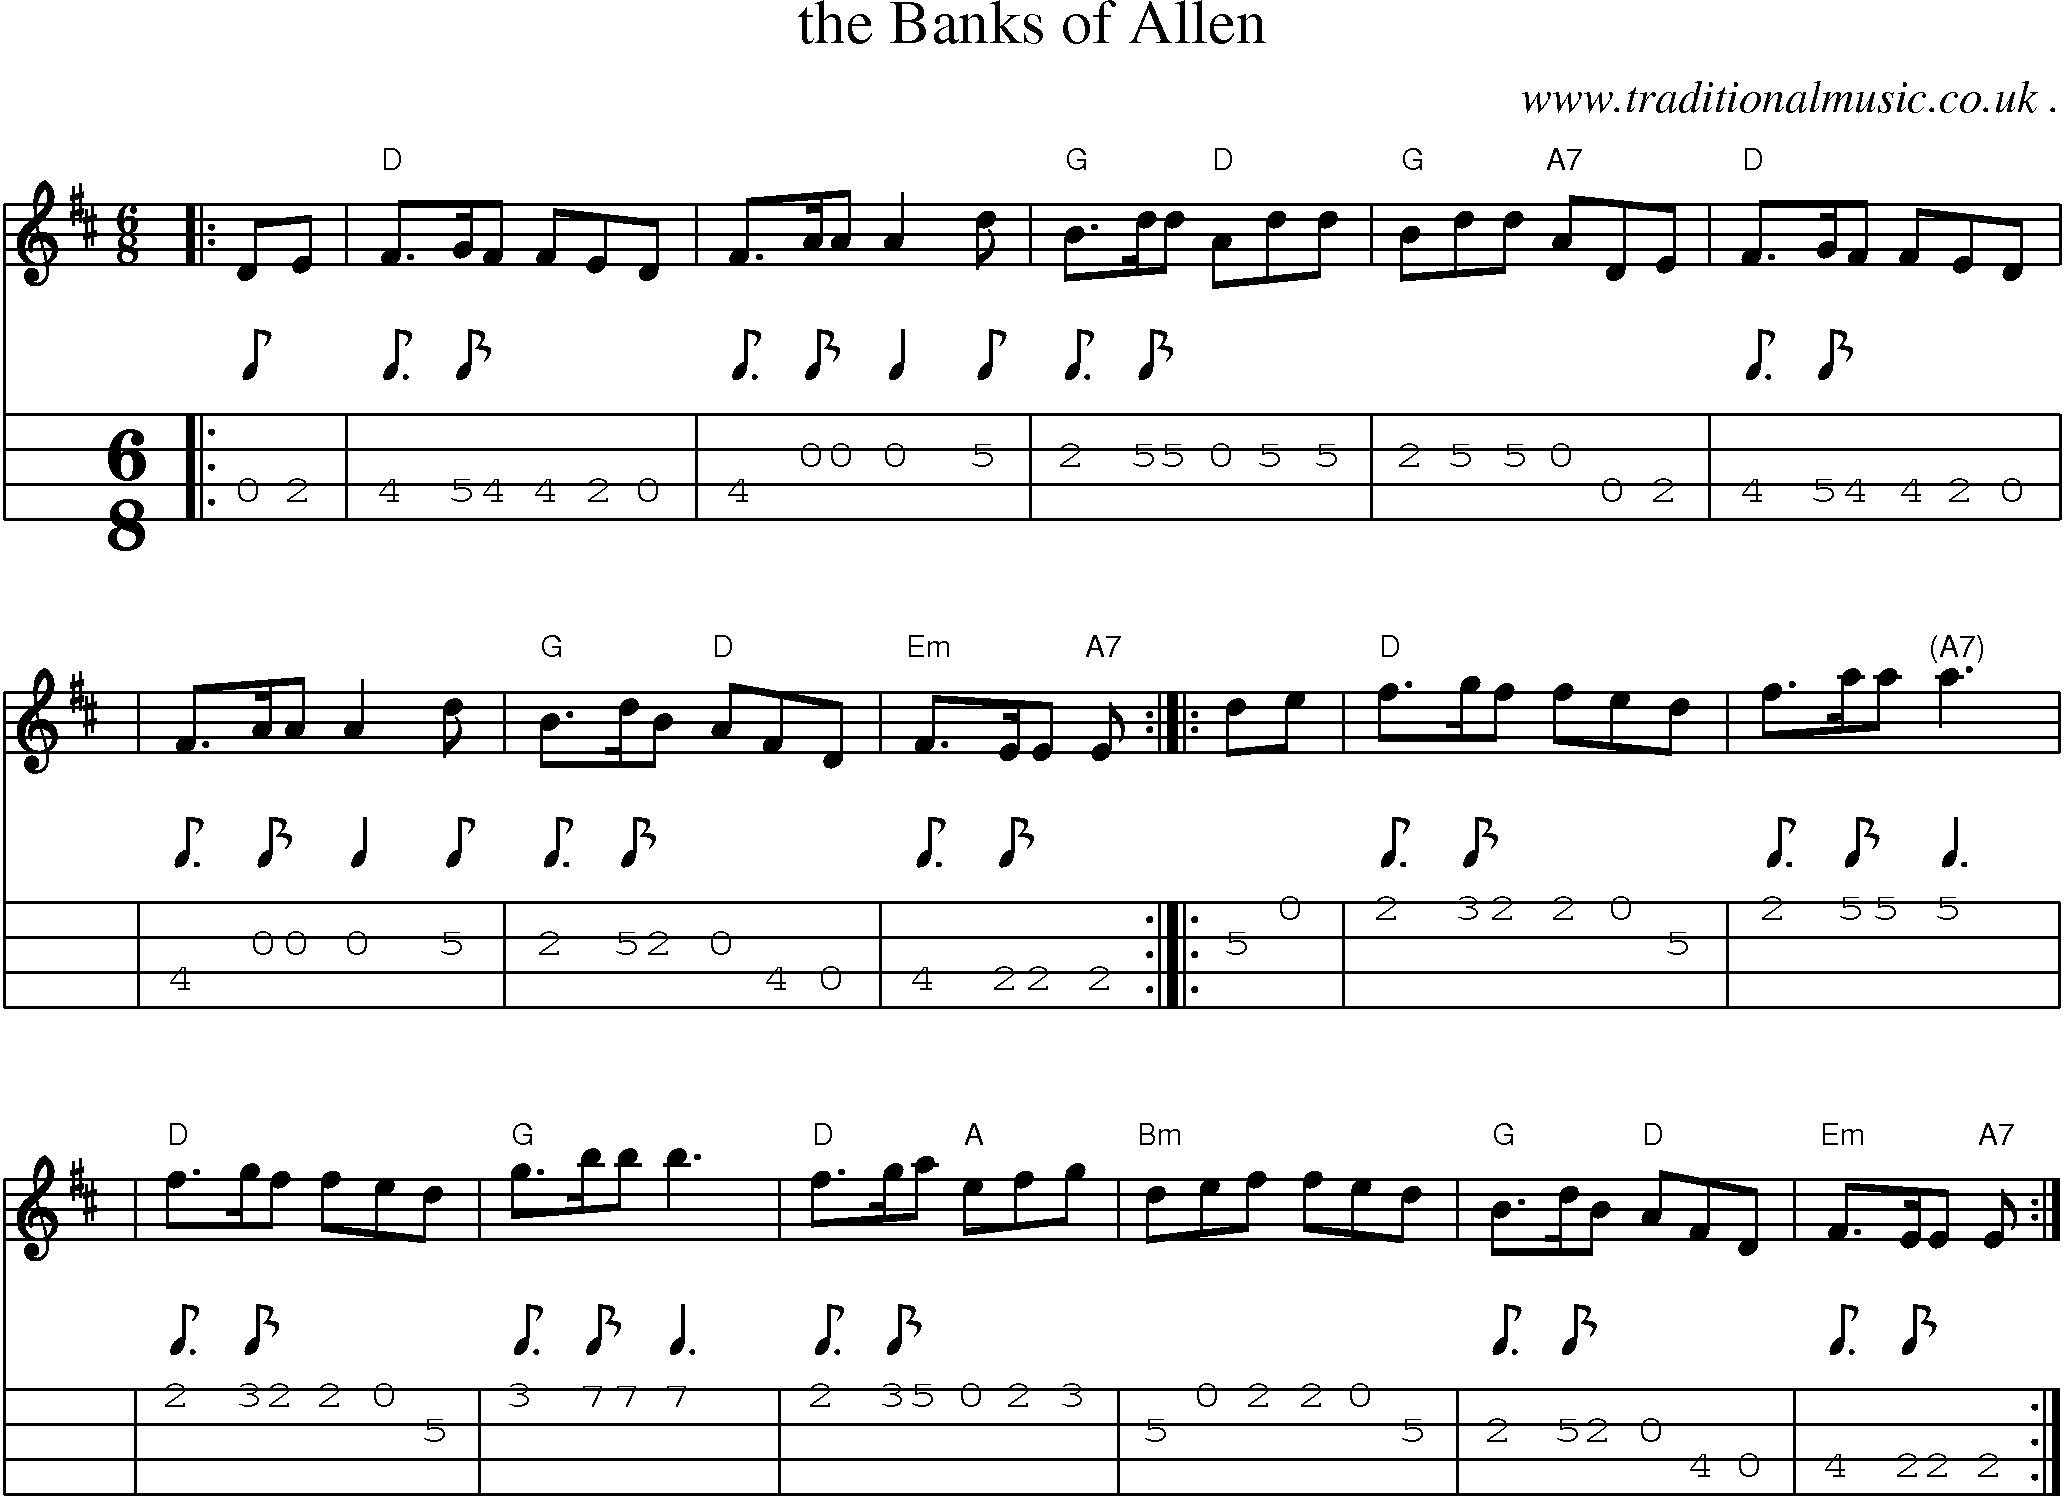 Sheet-music  score, Chords and Mandolin Tabs for The Banks Of Allen